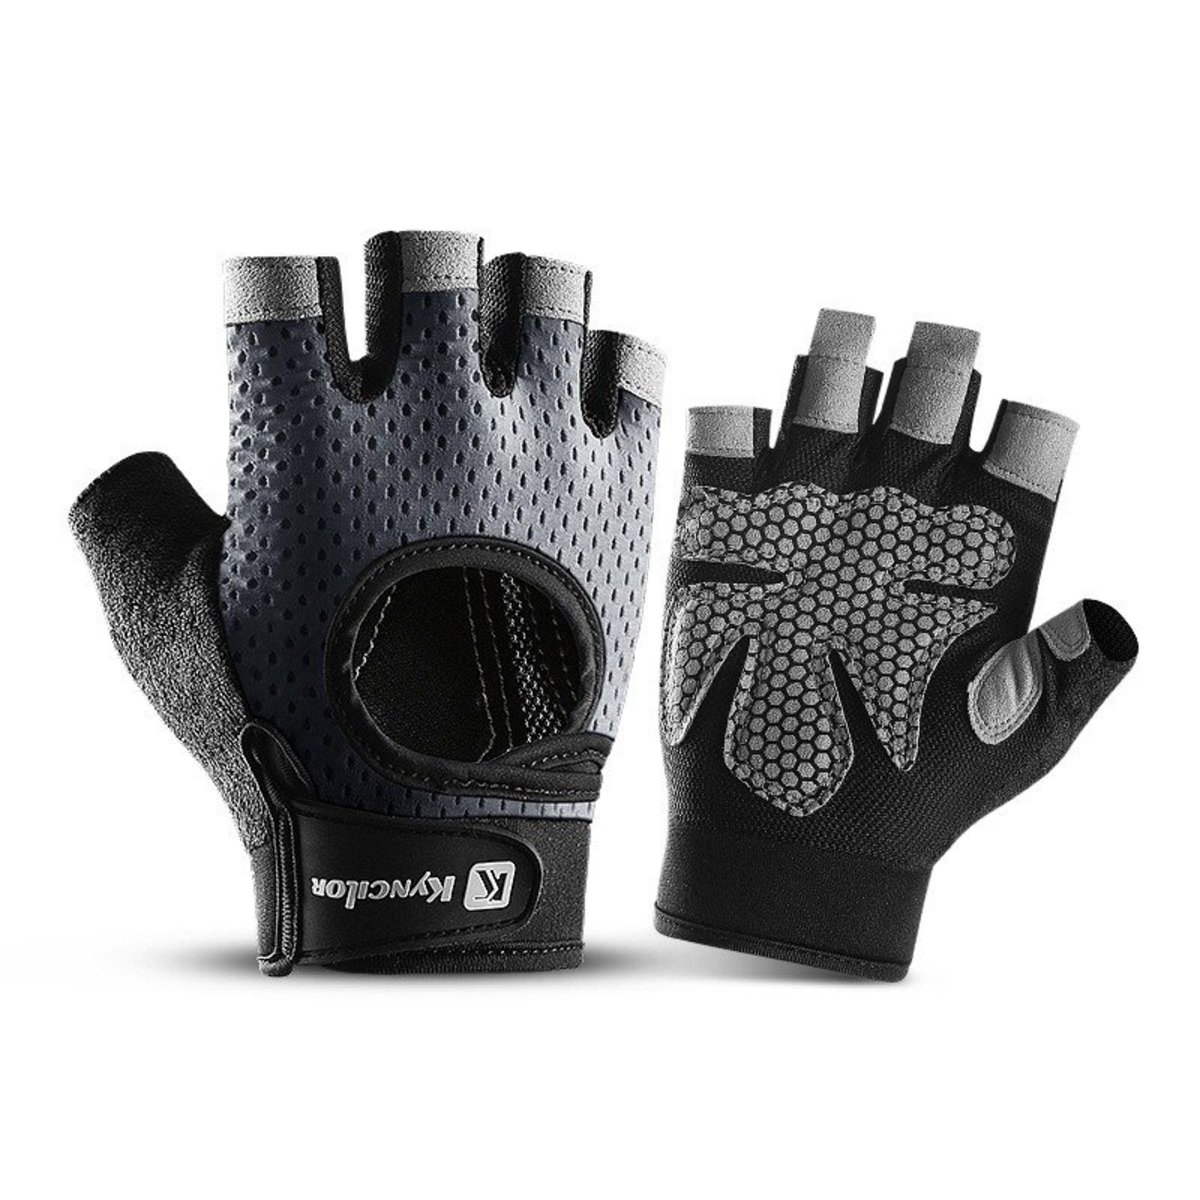 Breathable Multi Function Gym Bike Weight Gloves Size L Grey For Cycling, Gym, In-line skating